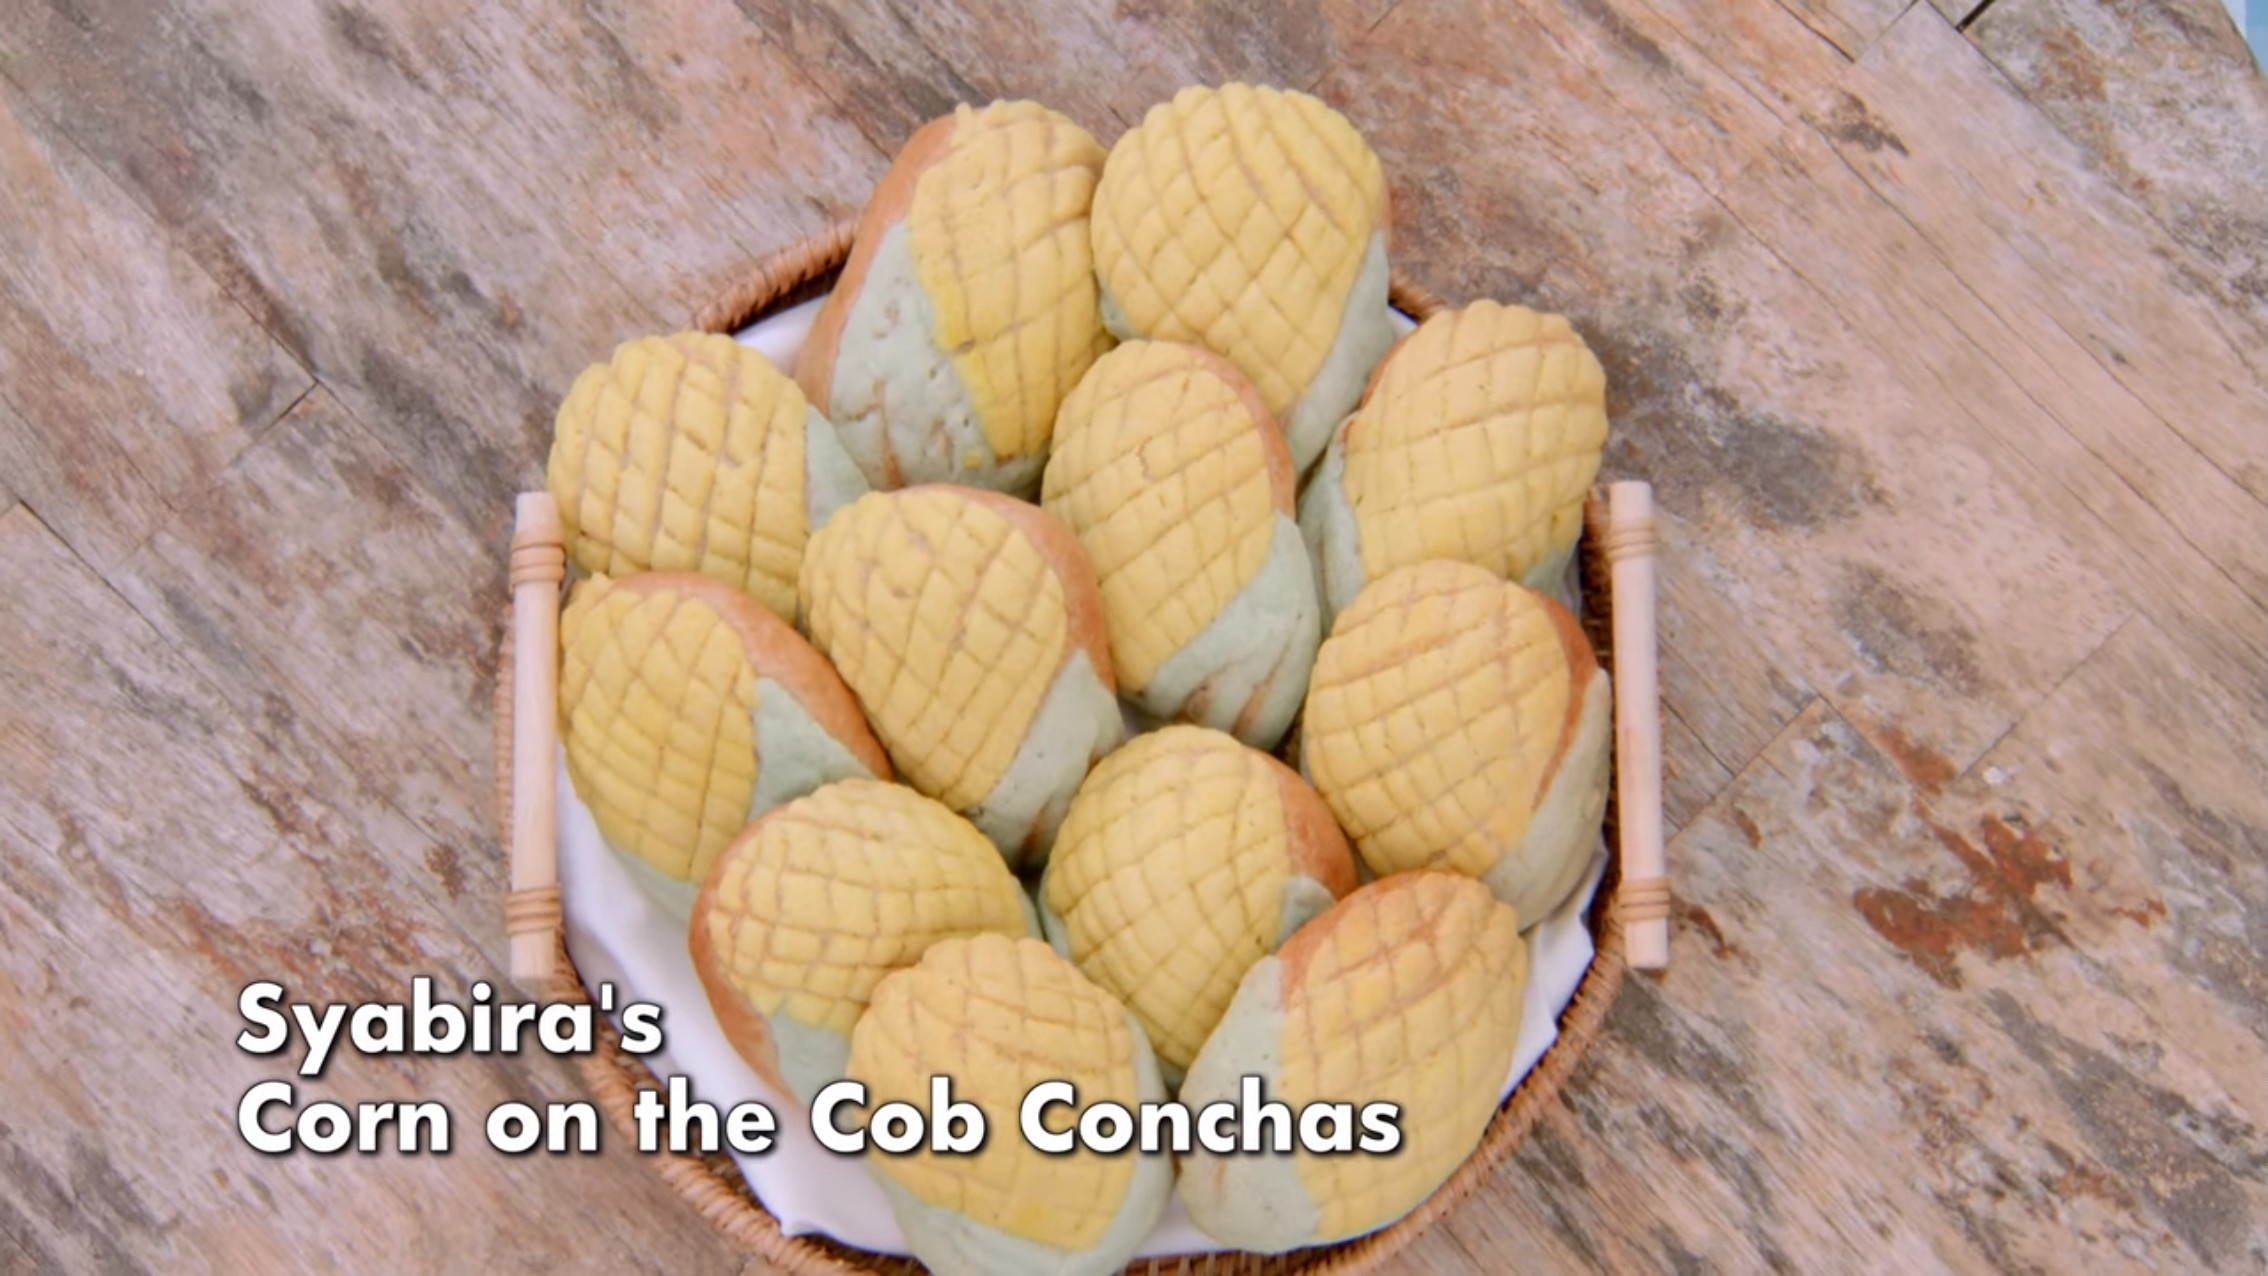 Picture shows: Syabira's Corn on the Cob Conchas Signature from The Great British Baking Show Collection 10's Mexican Week